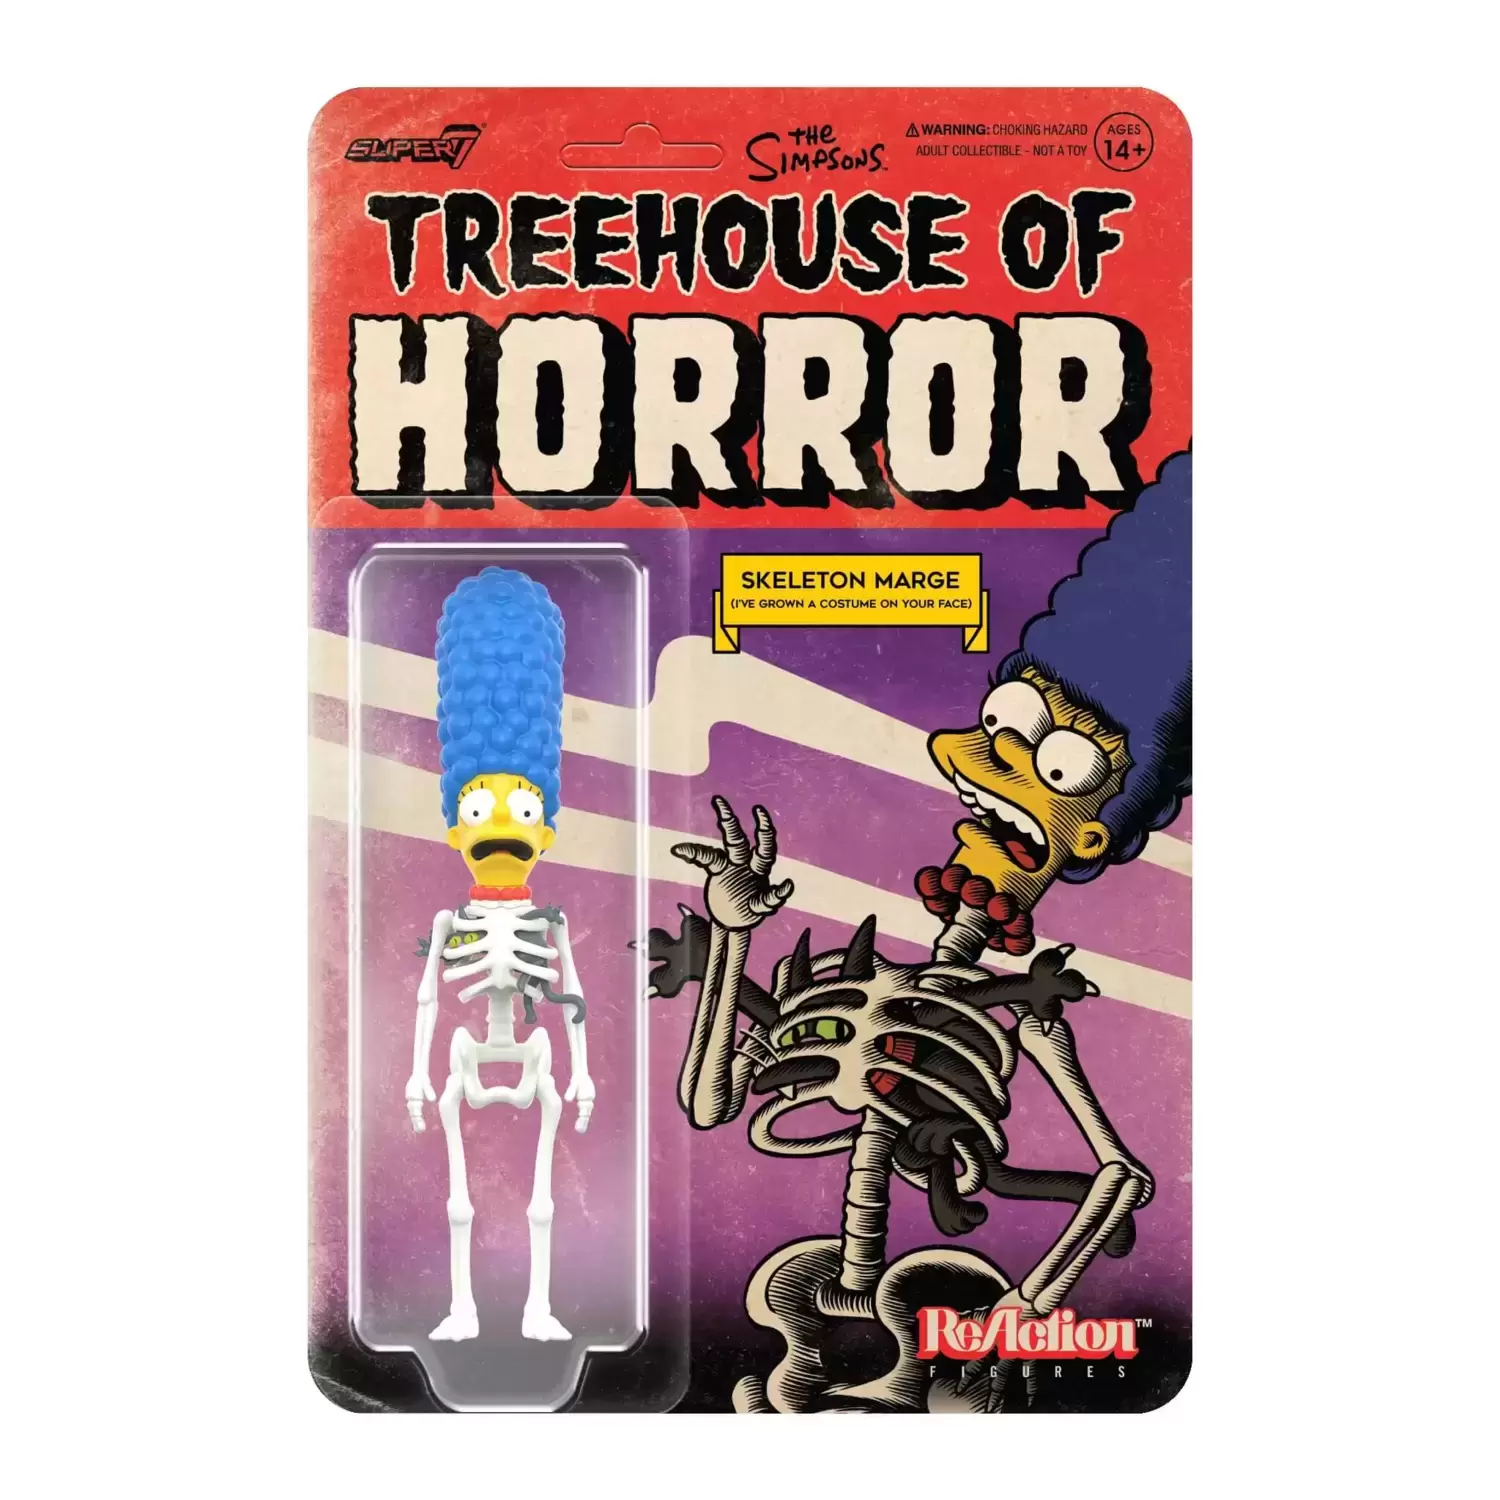 ReAction Figures - The Simpsons (Treehouse of Horror) -  Skeleton Marge